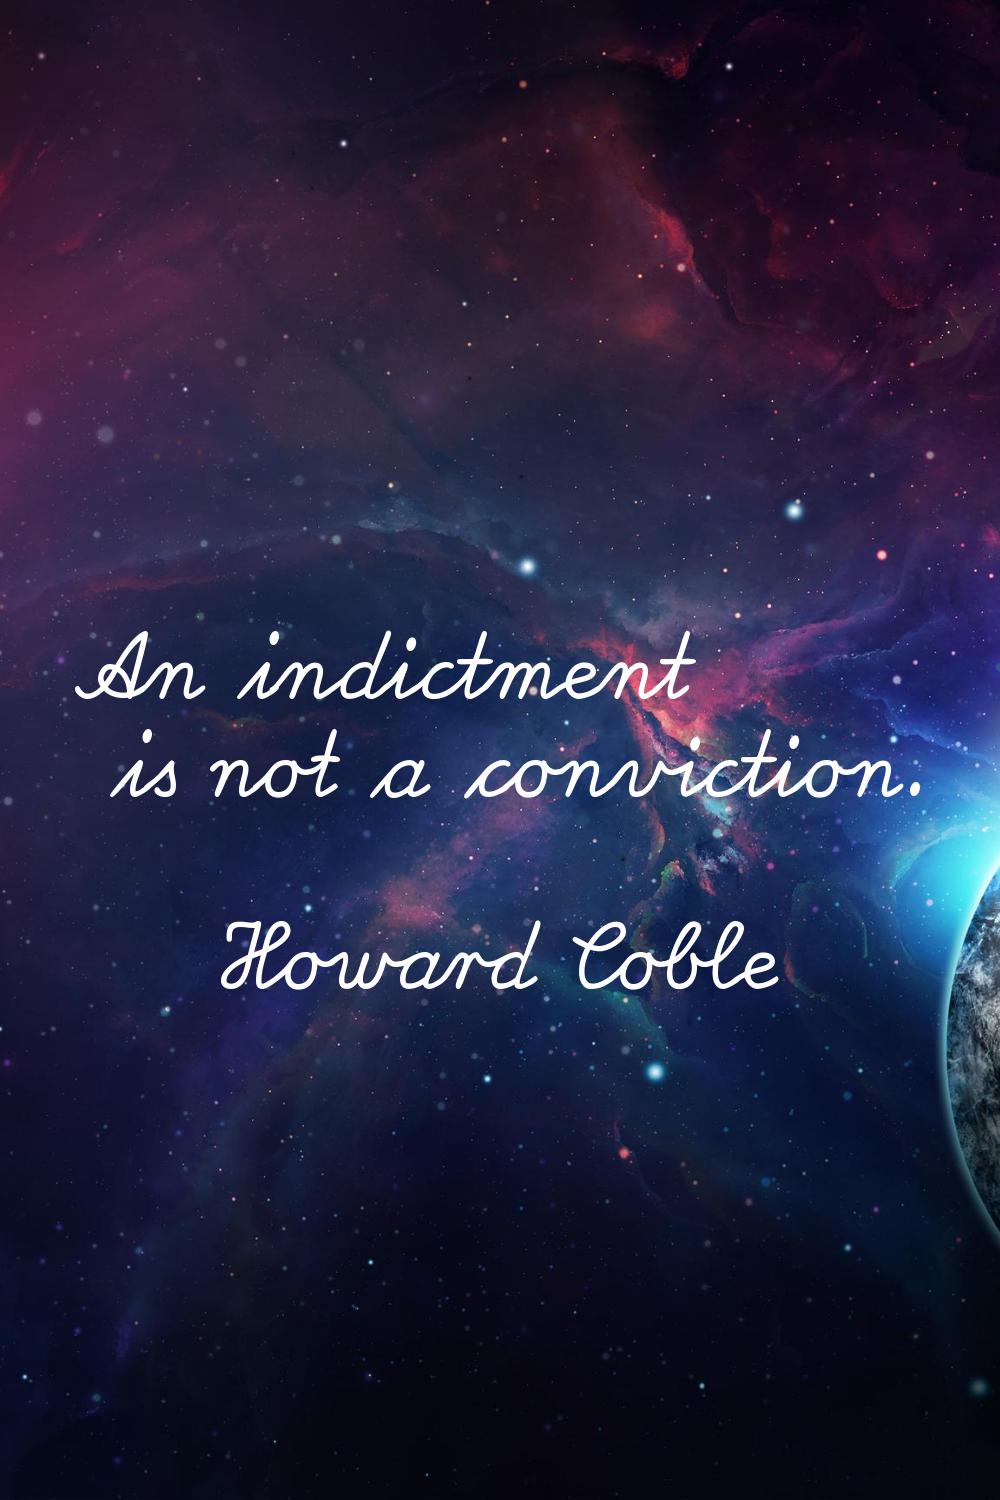 An indictment is not a conviction.